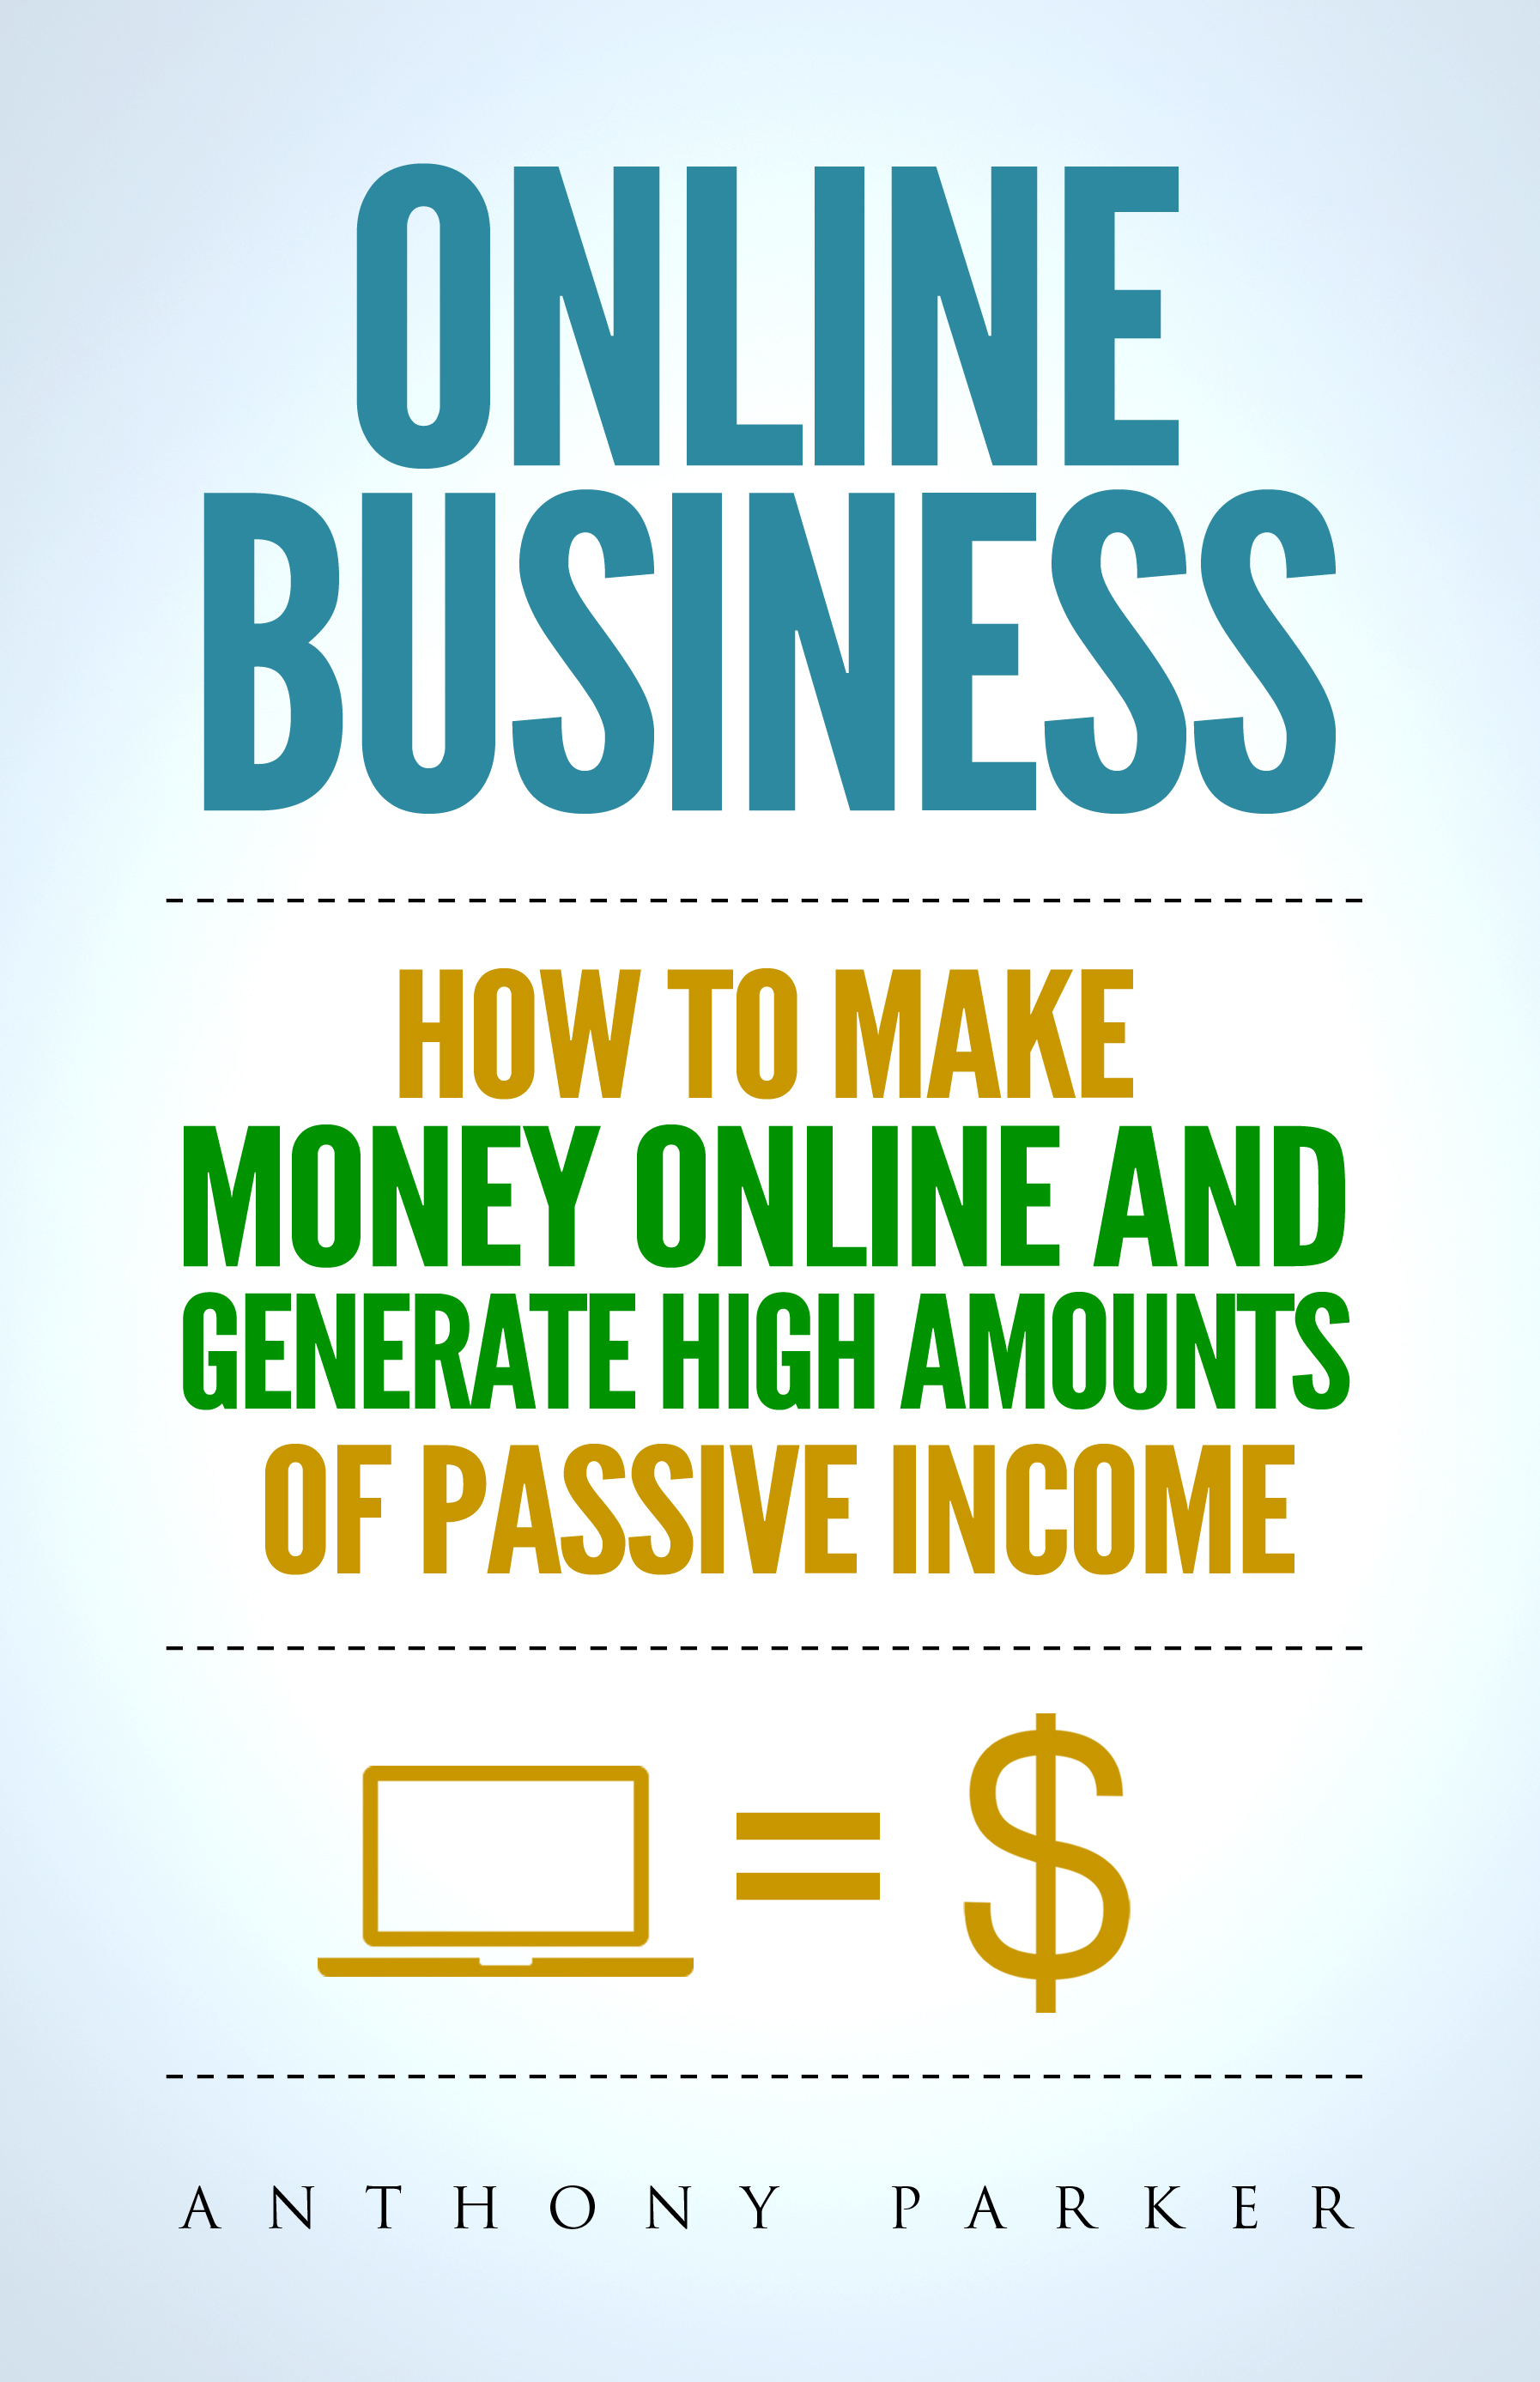 FREE: Online Business: Simple yet Effective Ideas on How To Make Money Online and Generate High Amounts of Passive Income, Affiliate Marketing, E-Commerce, Cryptocurrency Trading, Dropshipping by Anthony Parker